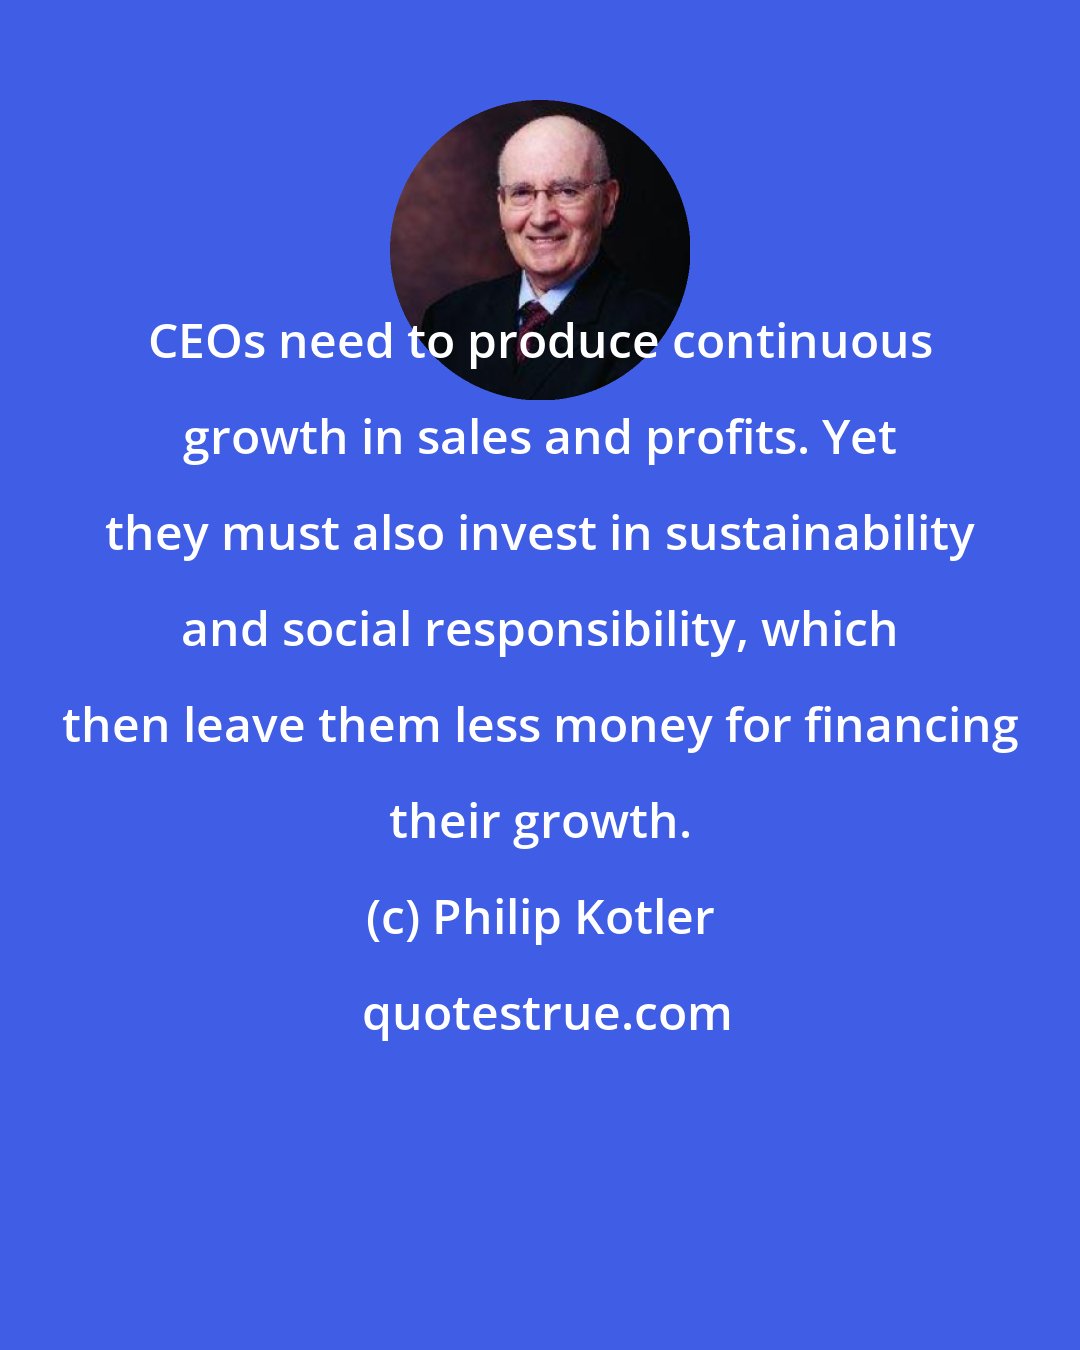 Philip Kotler: CEOs need to produce continuous growth in sales and profits. Yet they must also invest in sustainability and social responsibility, which then leave them less money for financing their growth.